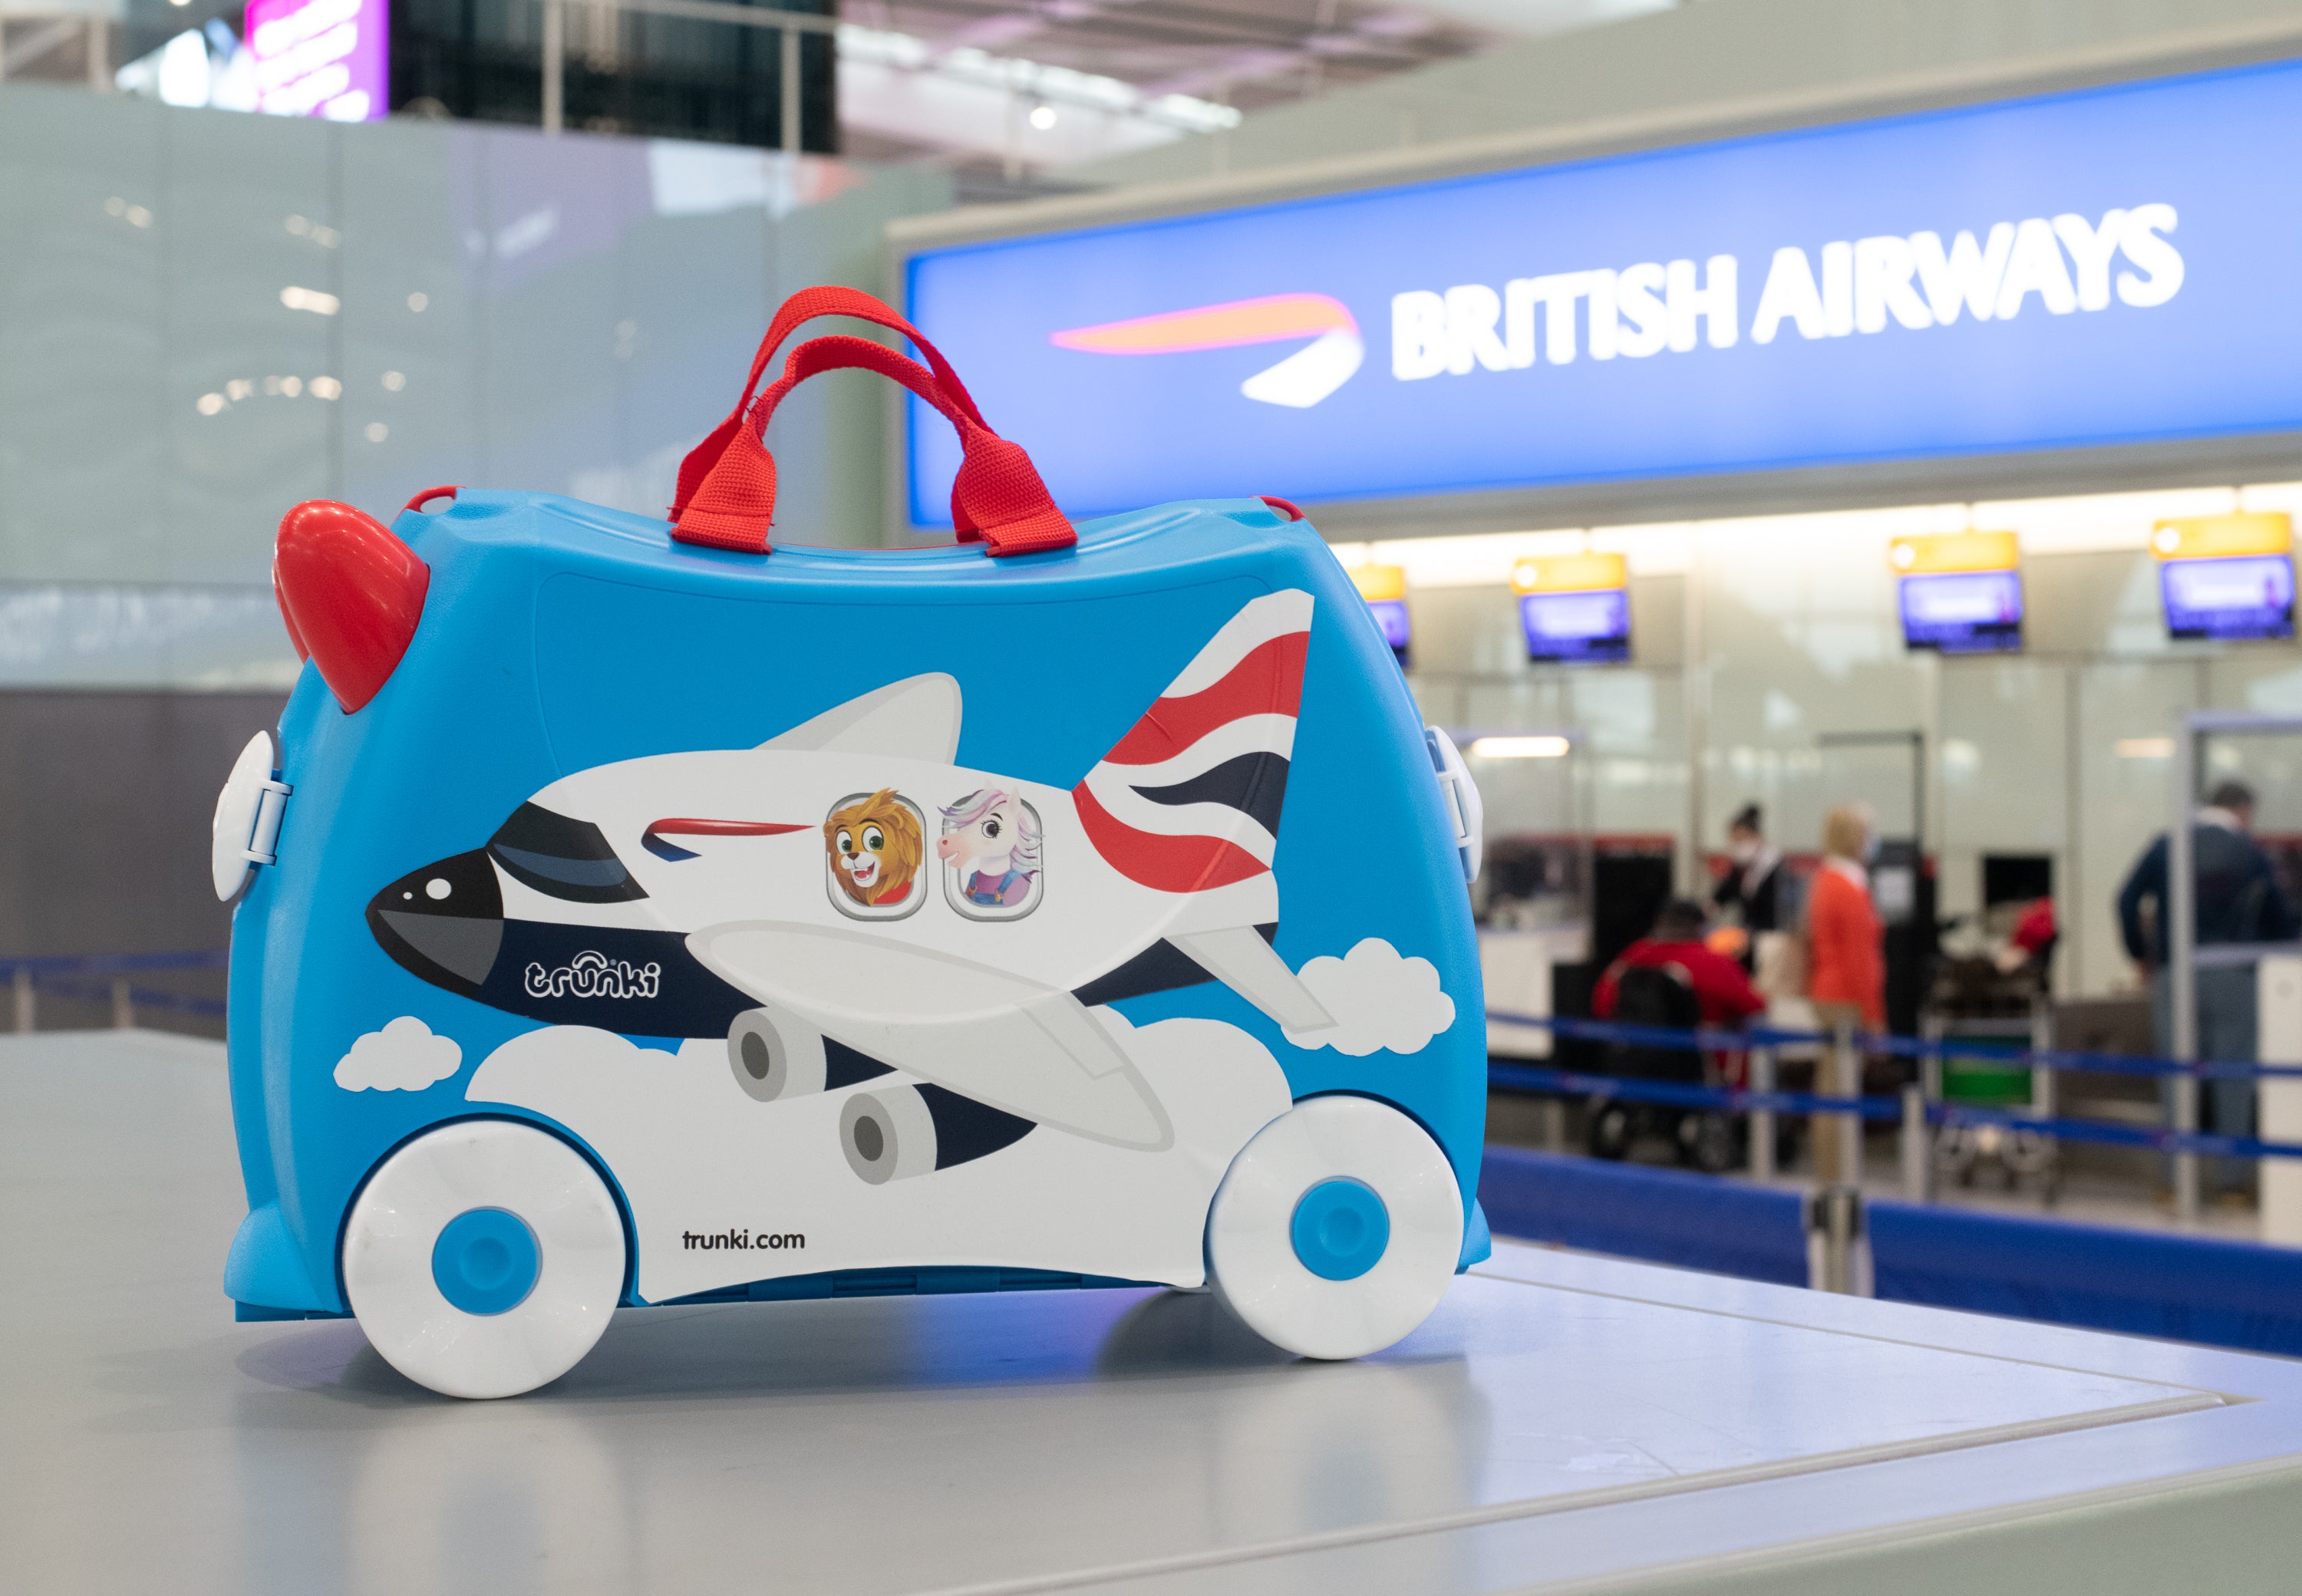 Flying with Trunki